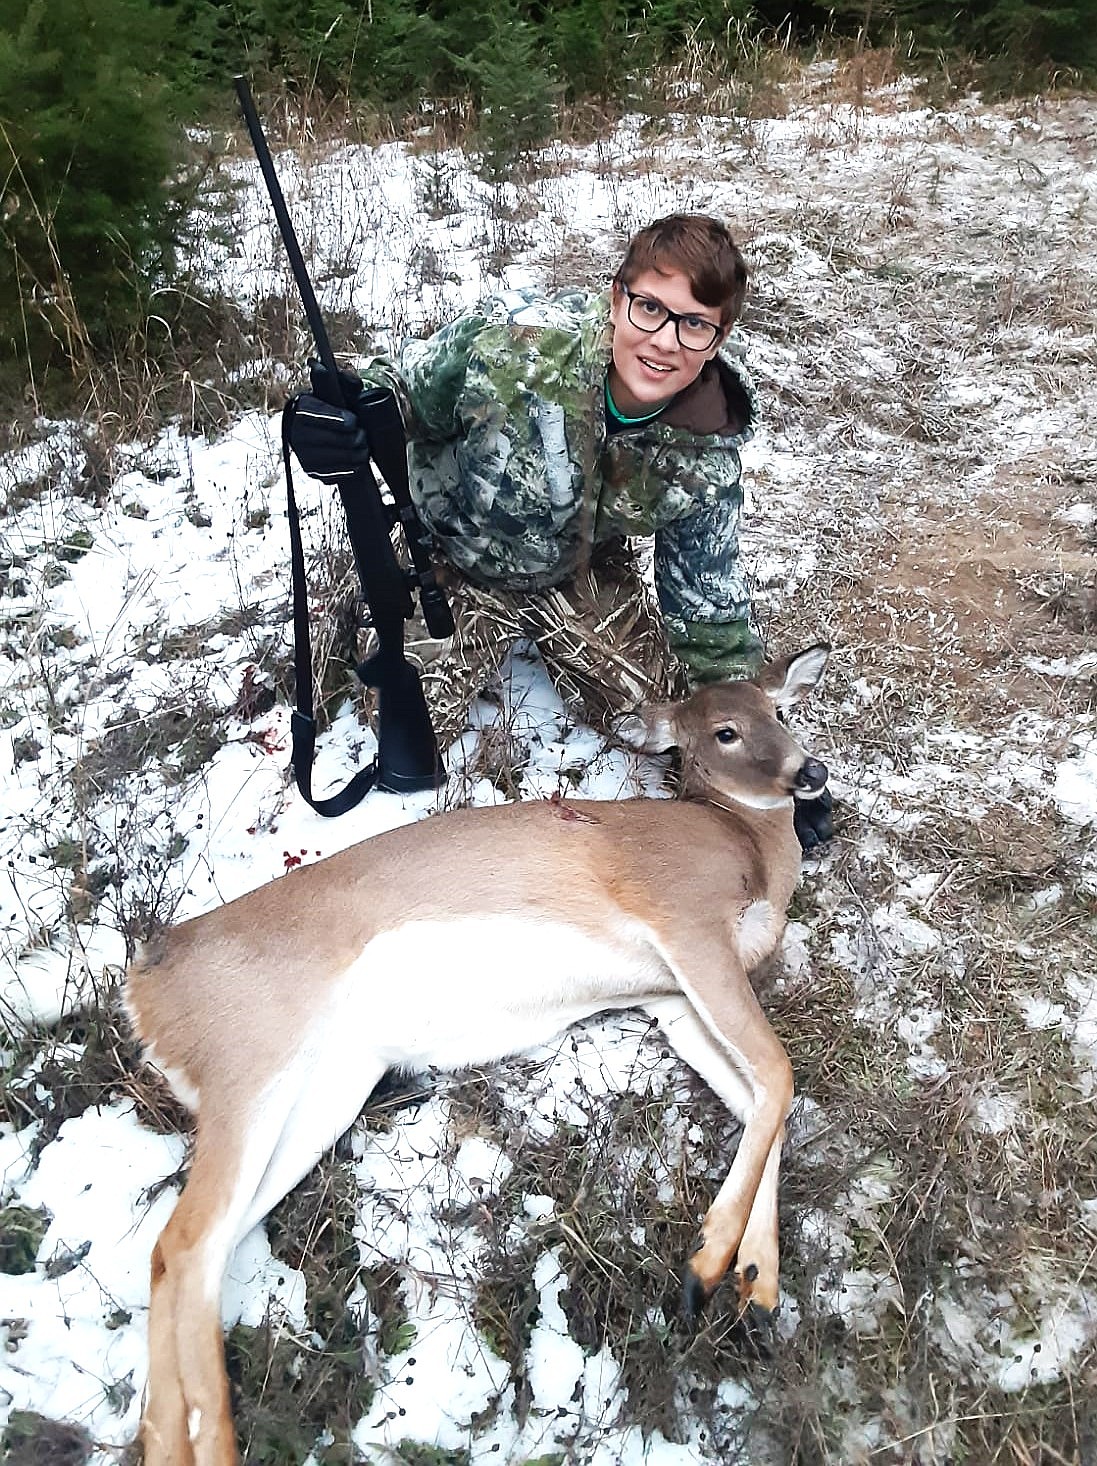 Winchester Woelfe shares a successful deer hunt.